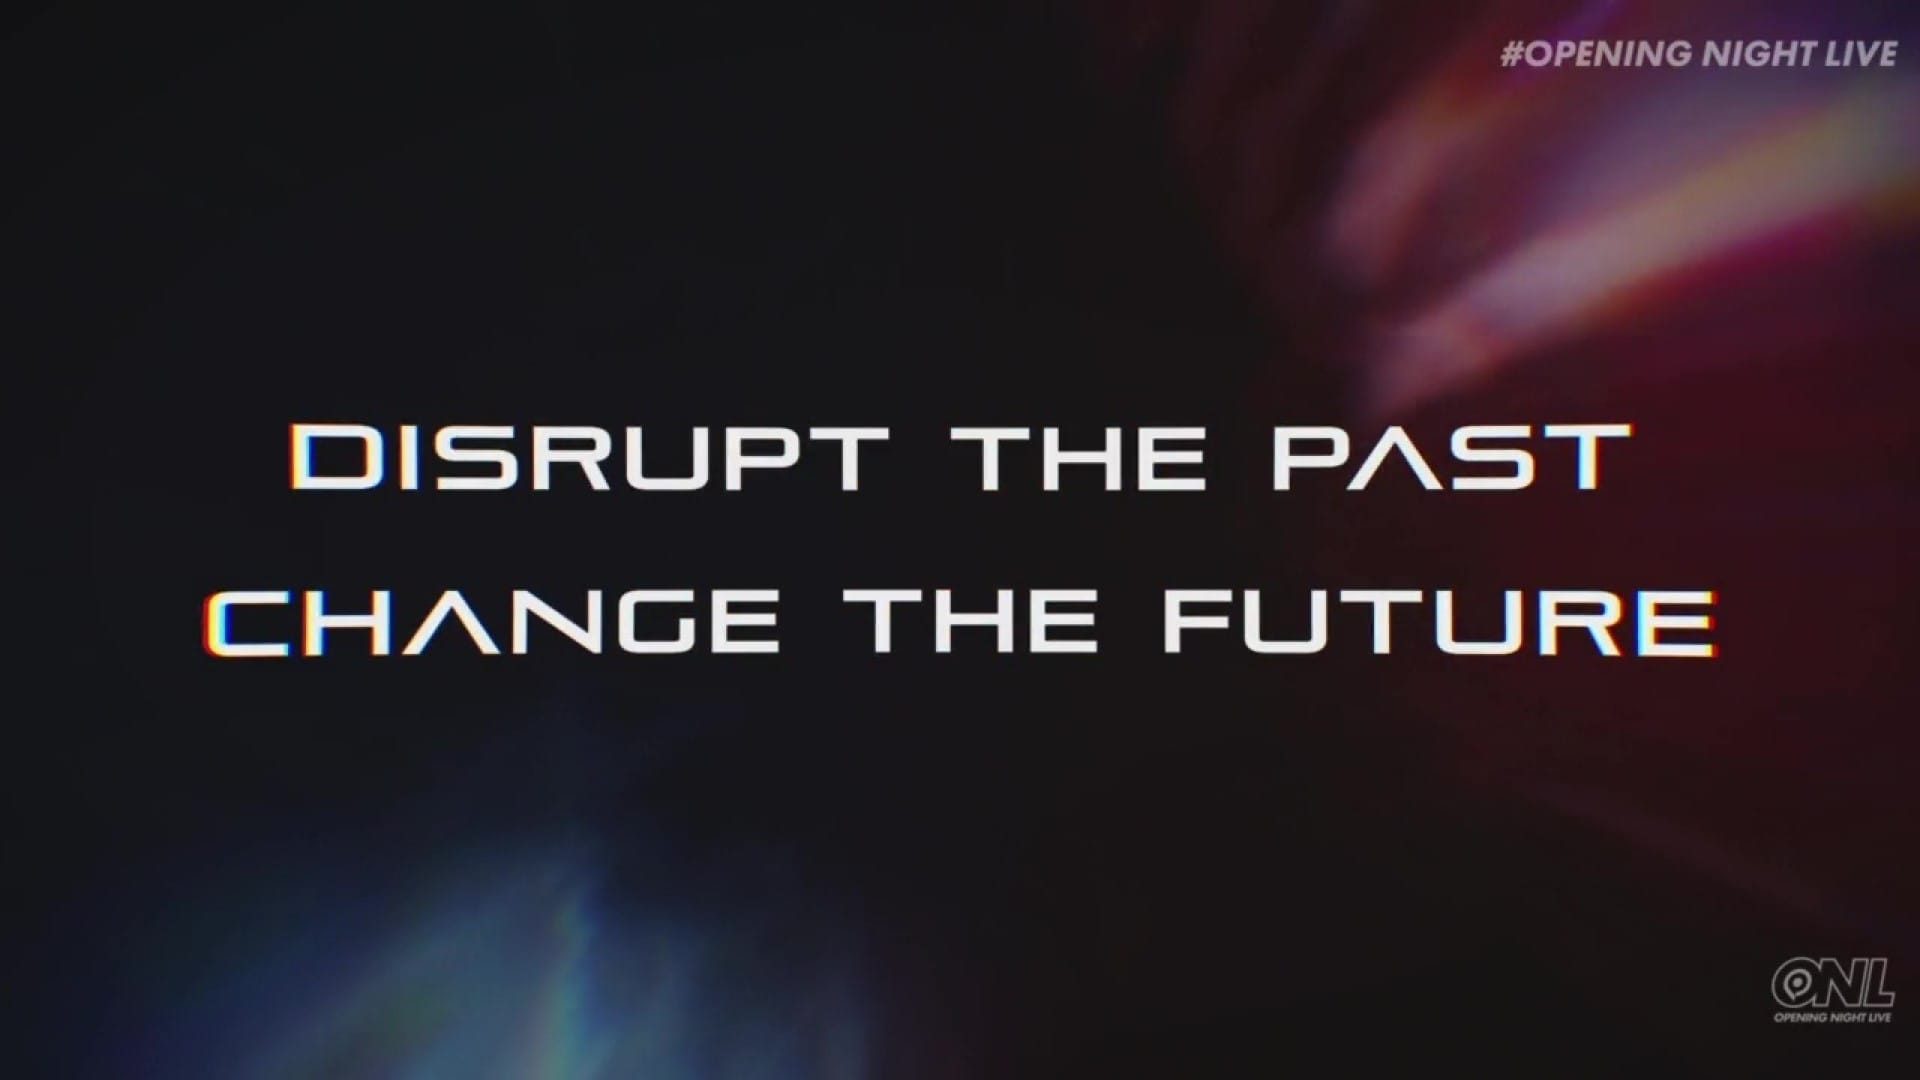 A simple caption reading disrupt the past, change the future.